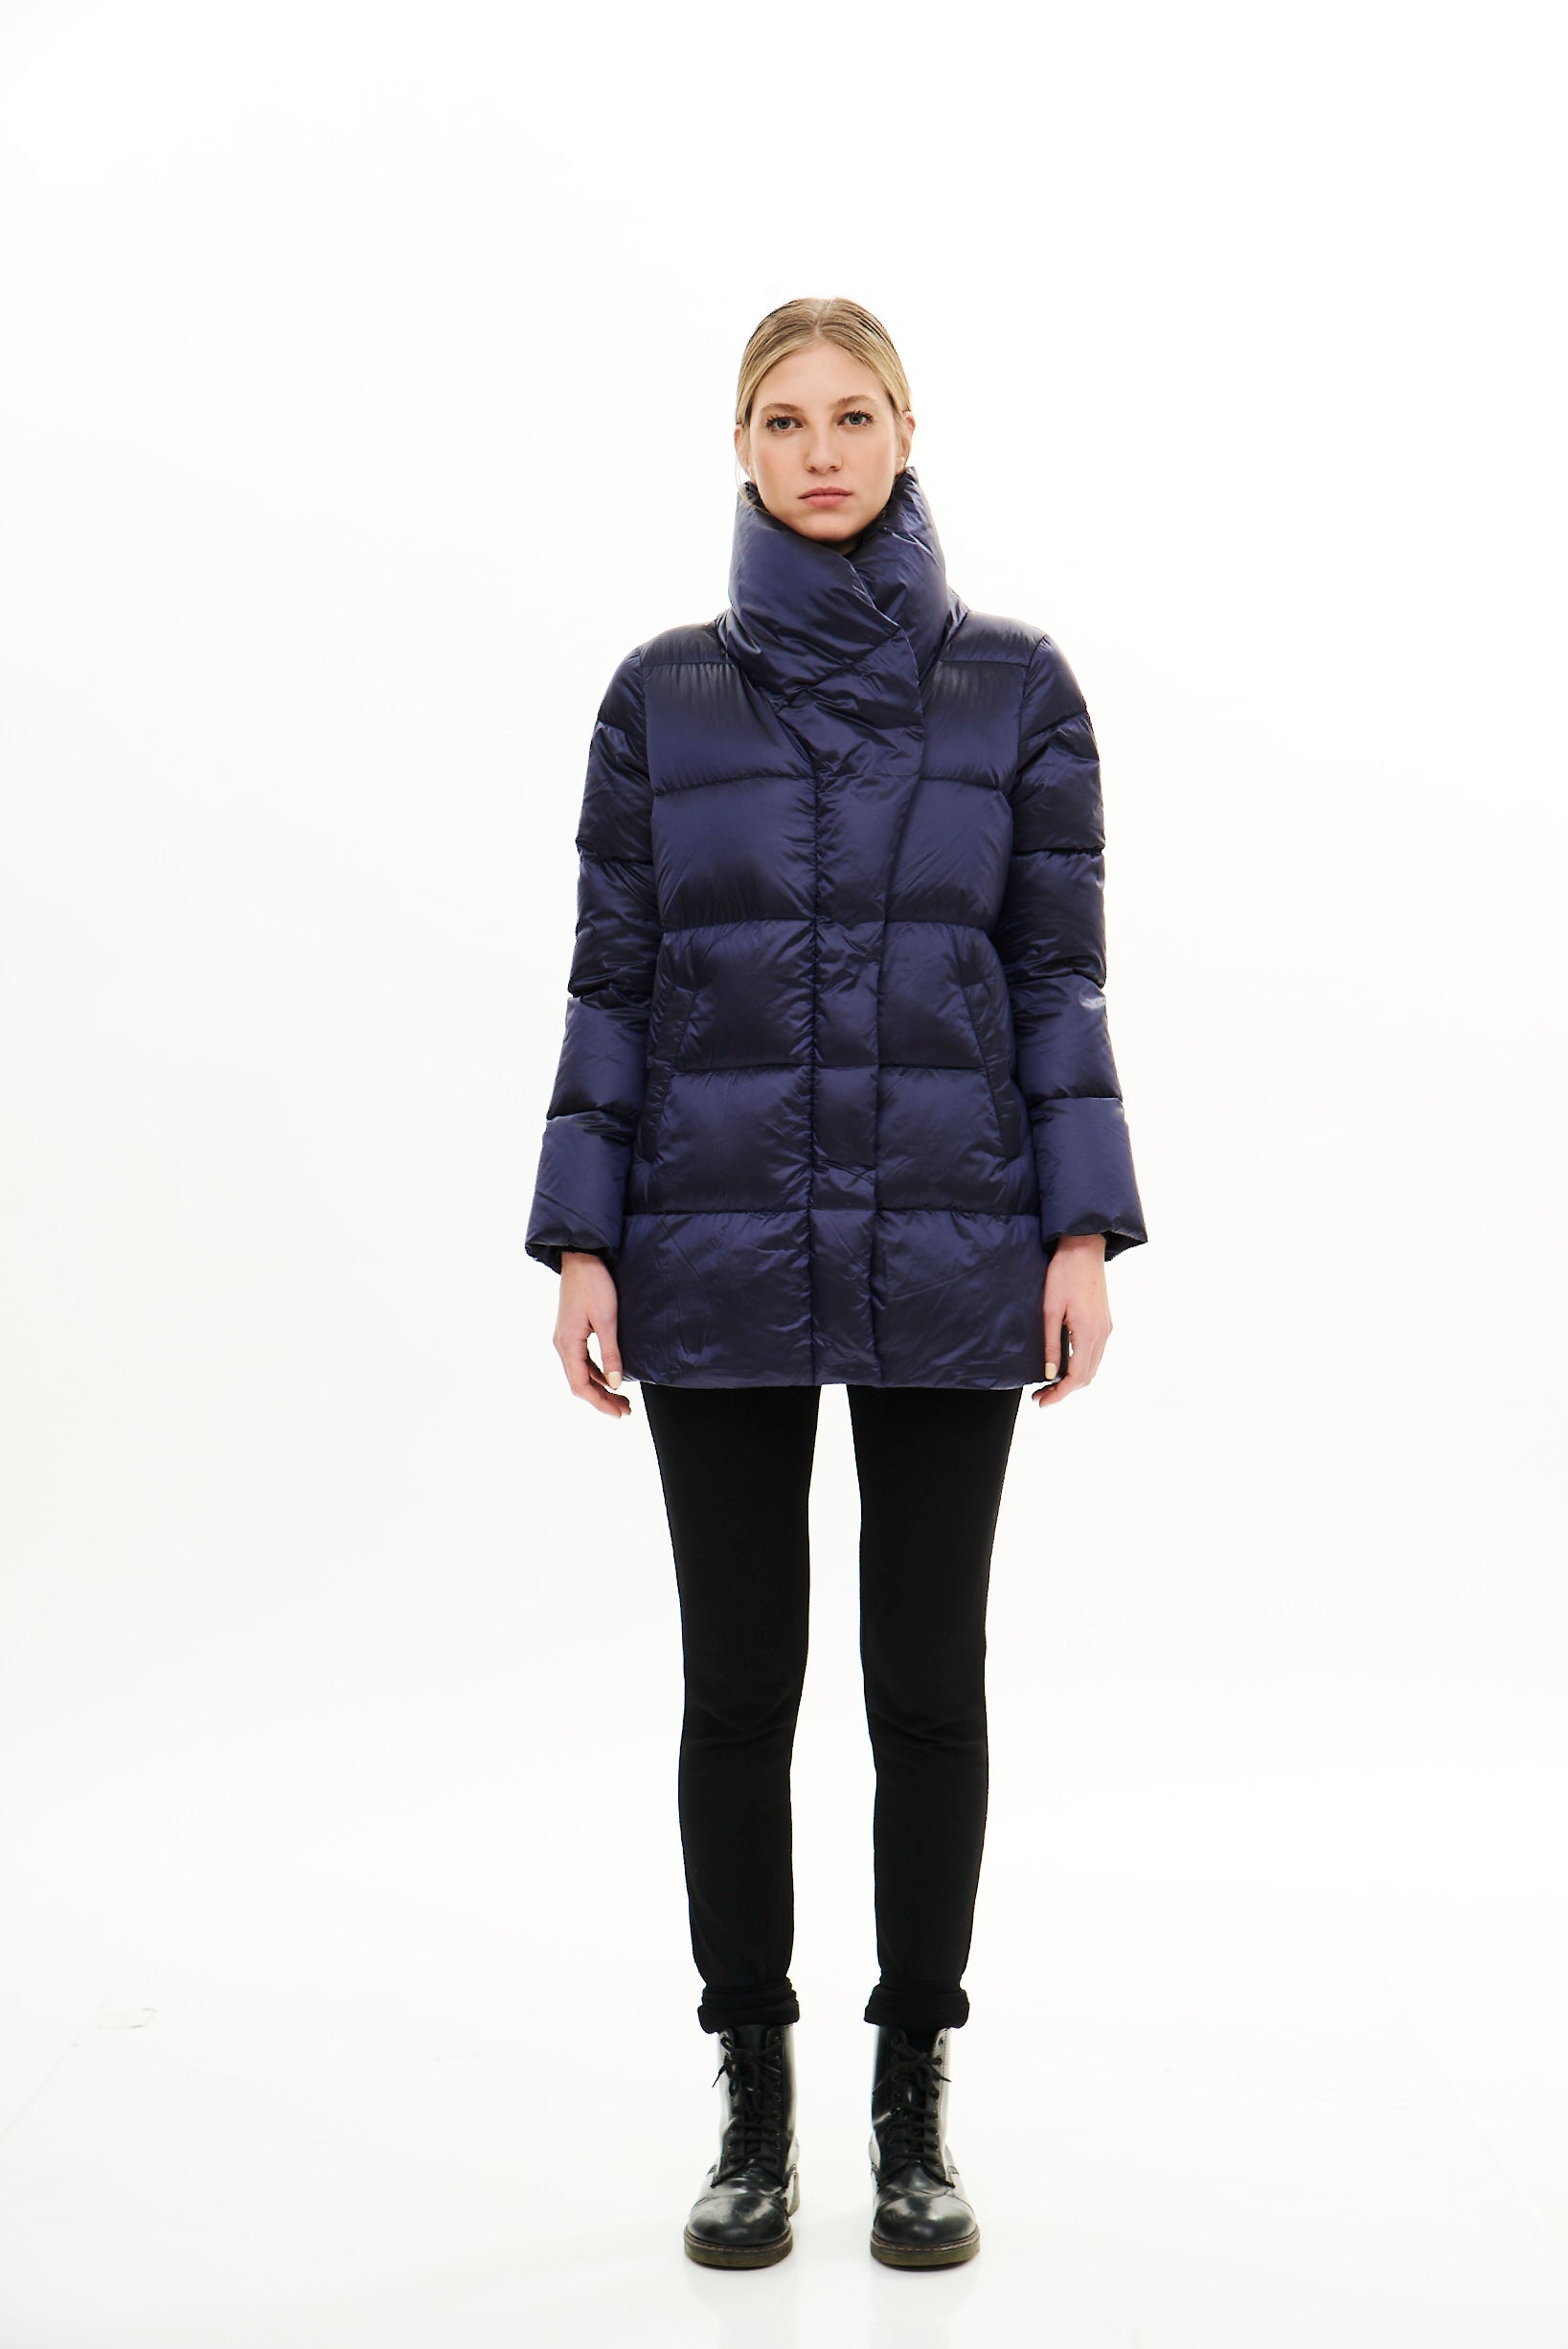 Products – Gianfranco Ferré Outerwear